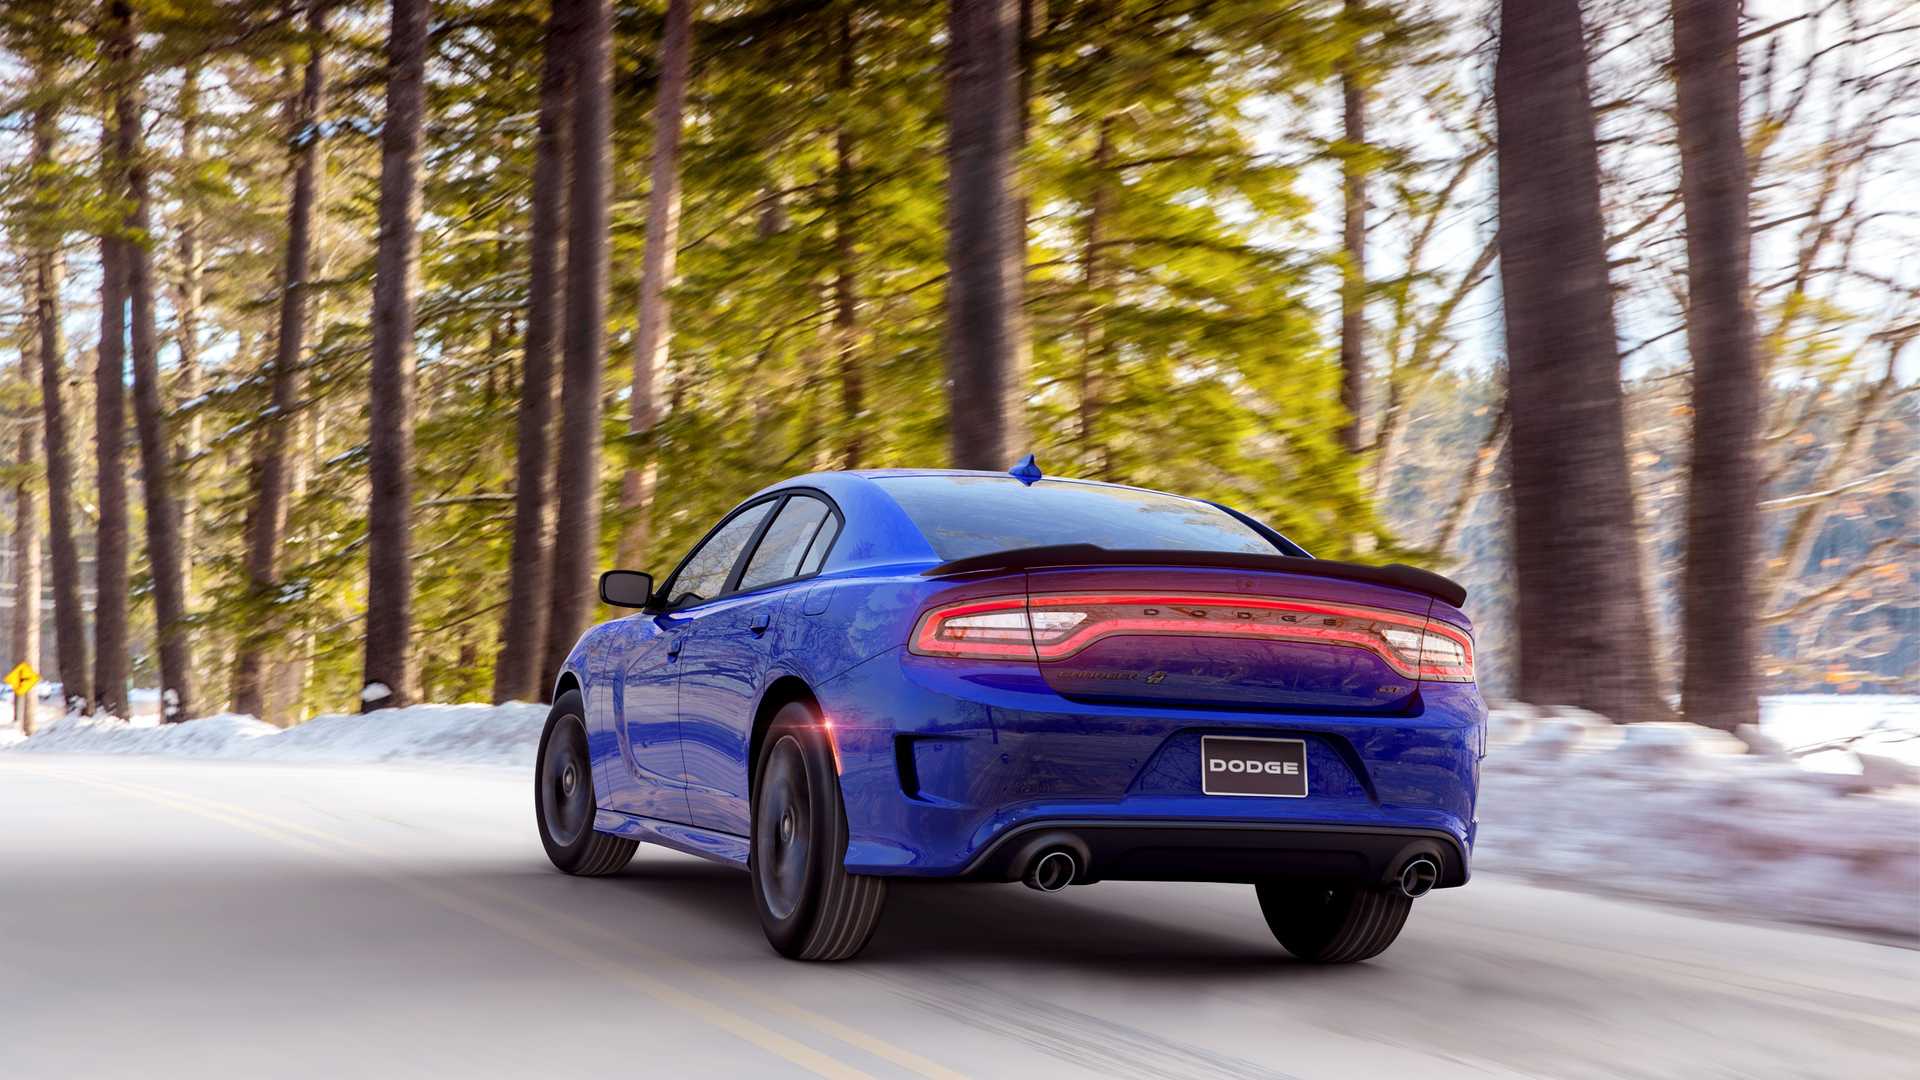 Rear angled view of a blue Dodge Charger GT